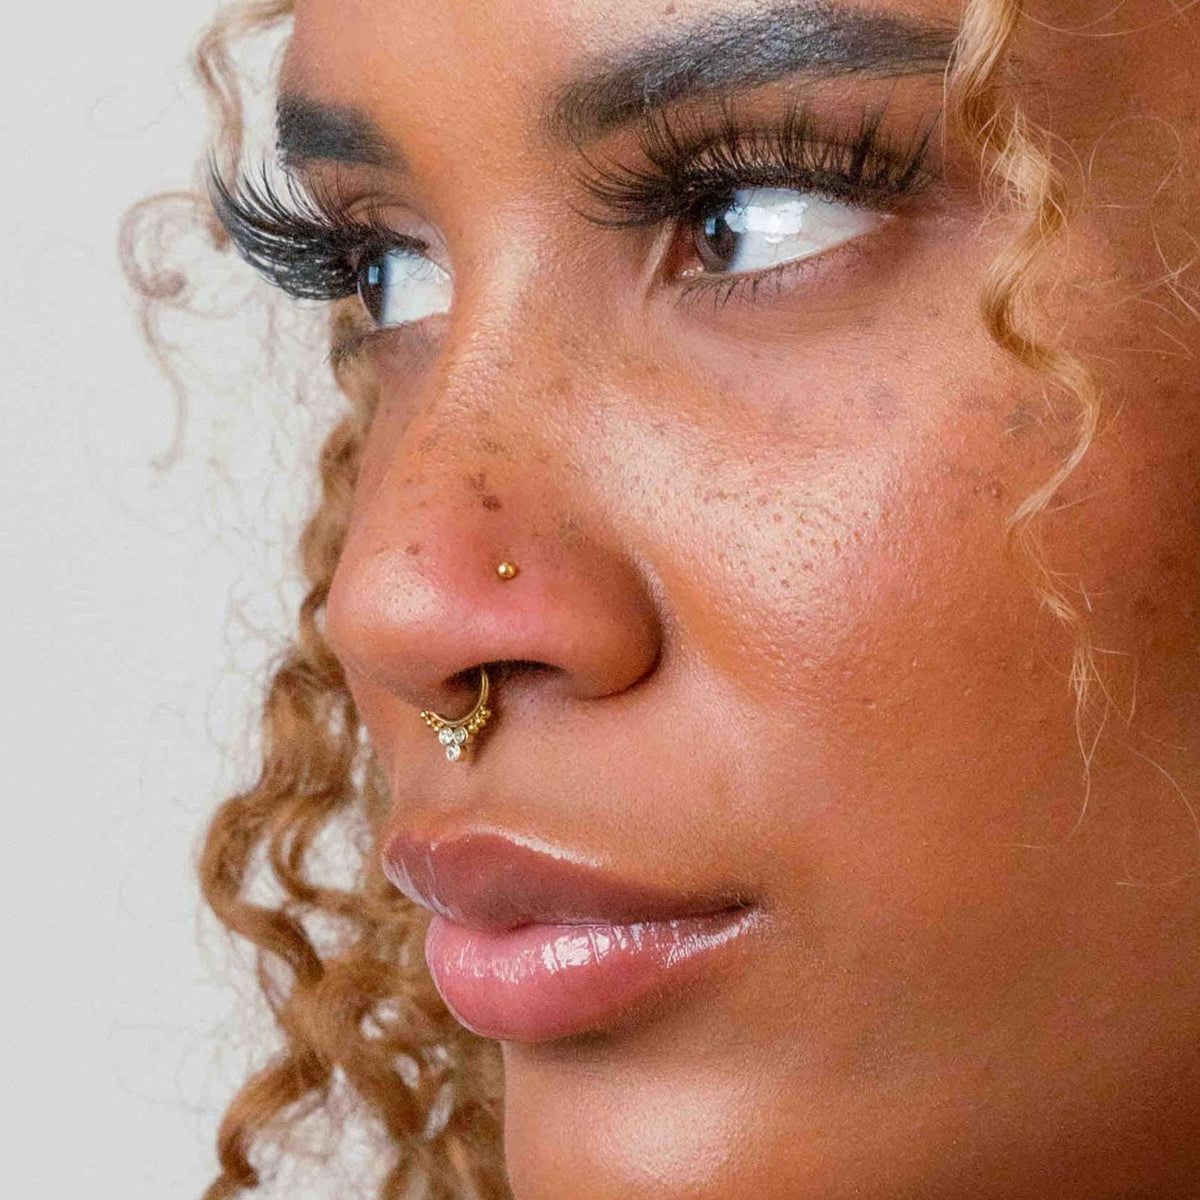 Dropship 12 Pcs African Nose Cuffs Fake Nose Ring For Women 14k Gold Plated  Clip On Nose Rings Adjustable Faux Nose Rings Hoop Non Piercing Jewelry to  Sell Online at a Lower